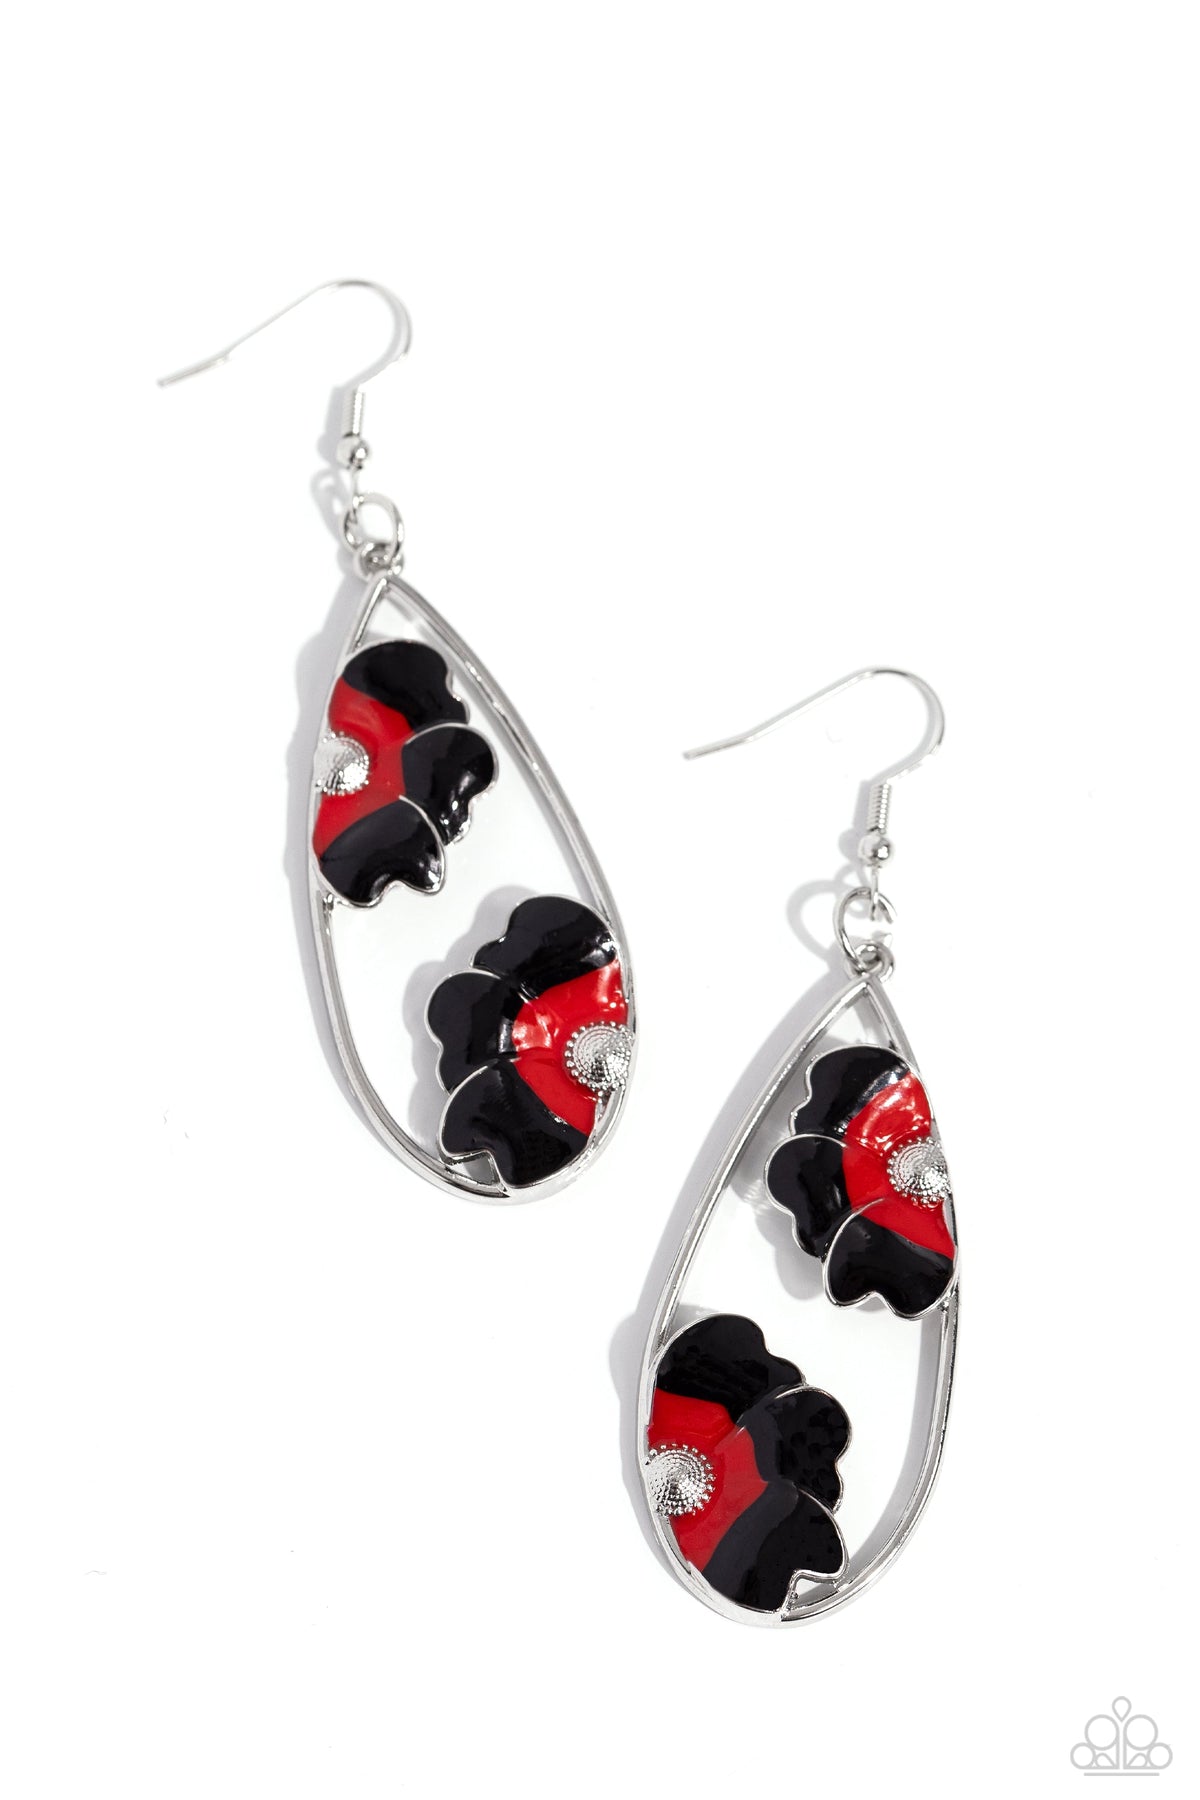 Airily Abloom Black &amp; Red Flower Earrings - Paparazzi Accessories- lightbox - CarasShop.com - $5 Jewelry by Cara Jewels